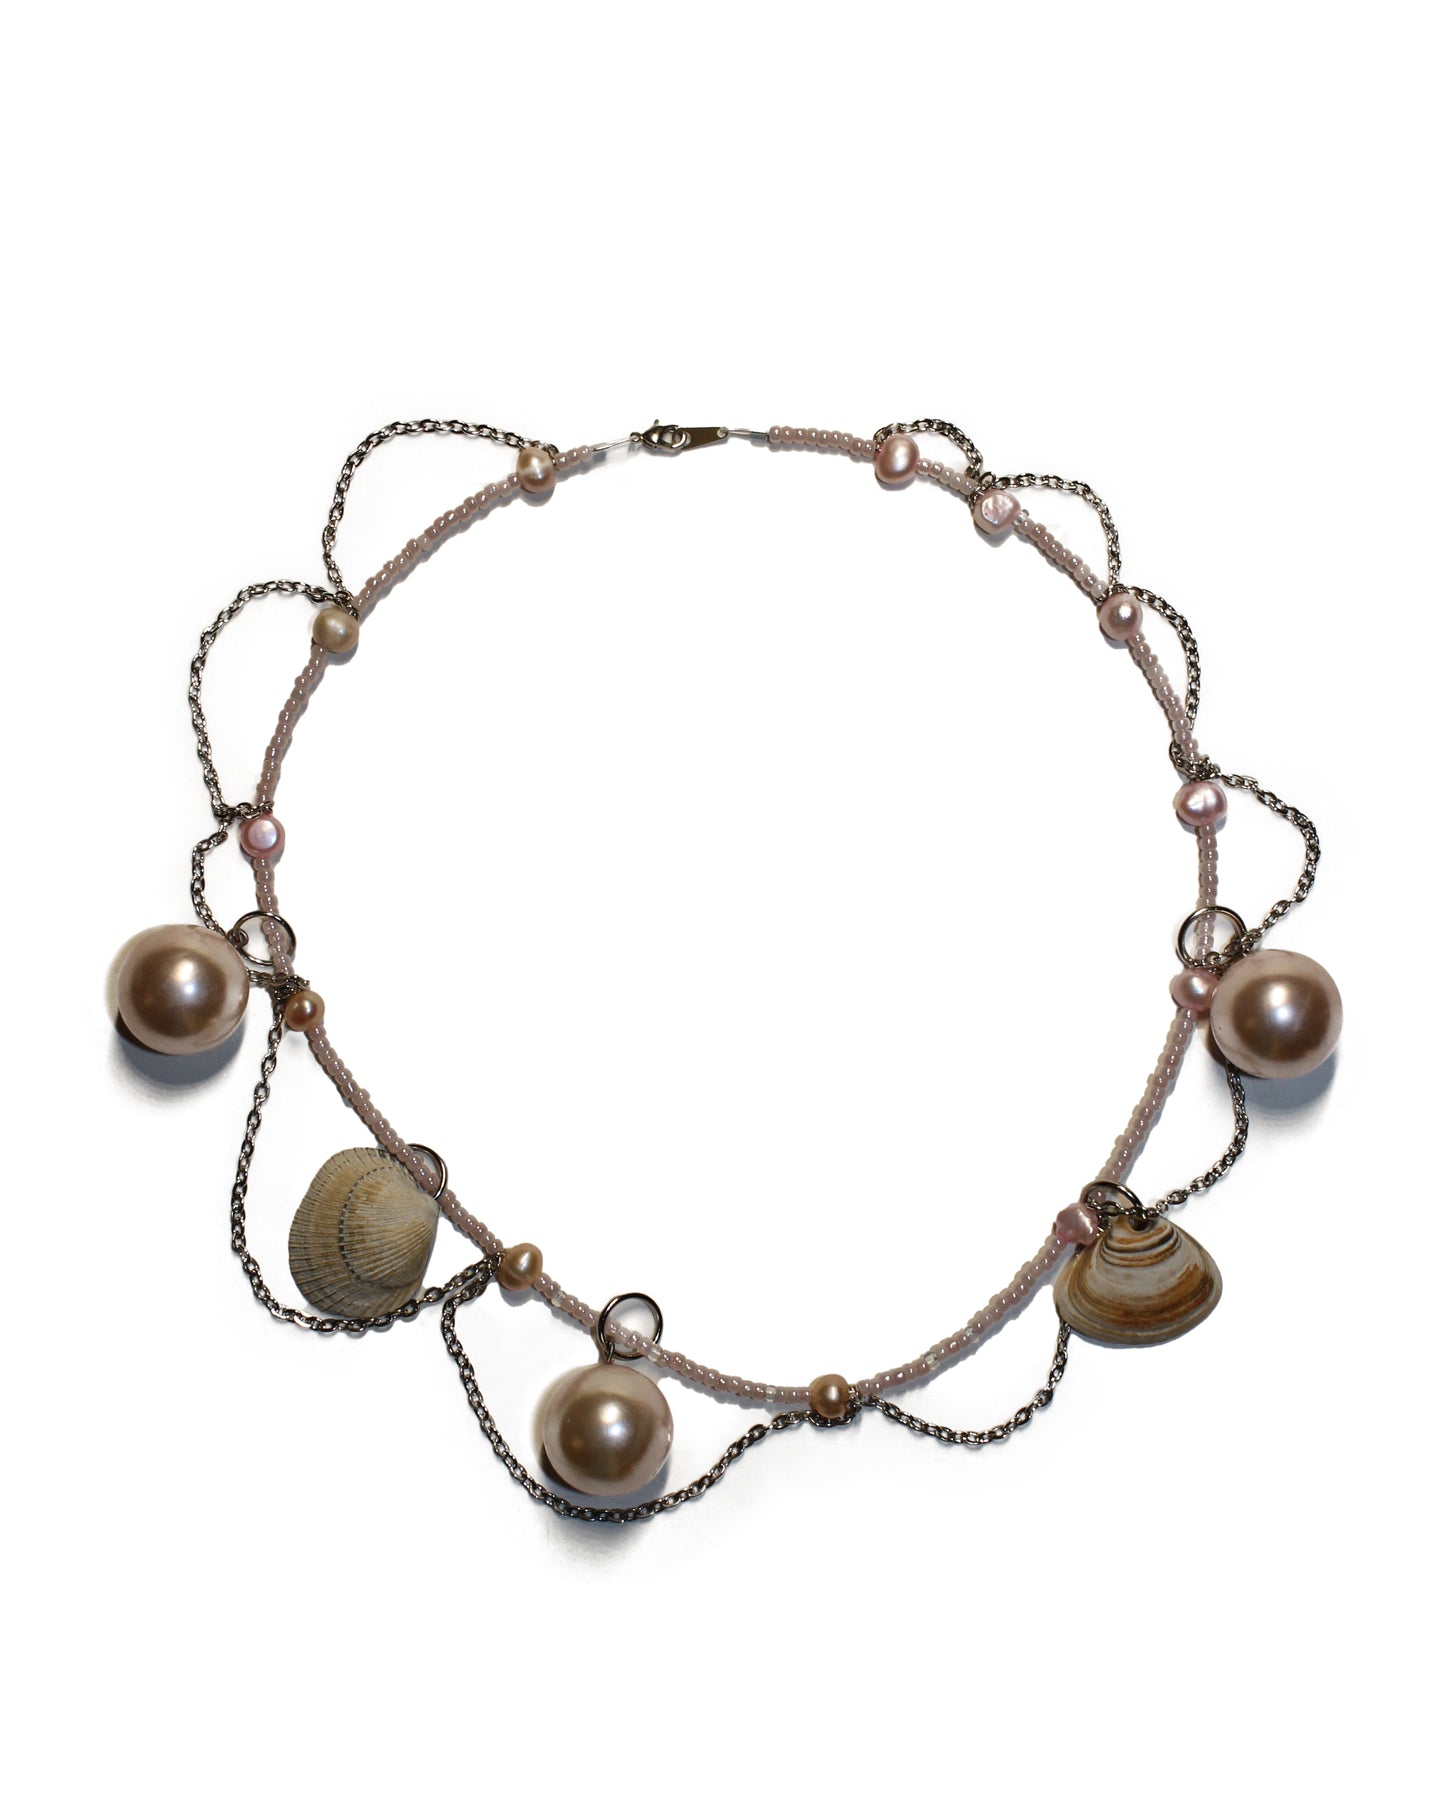 Jacob Riis Clam and Ark Necklace